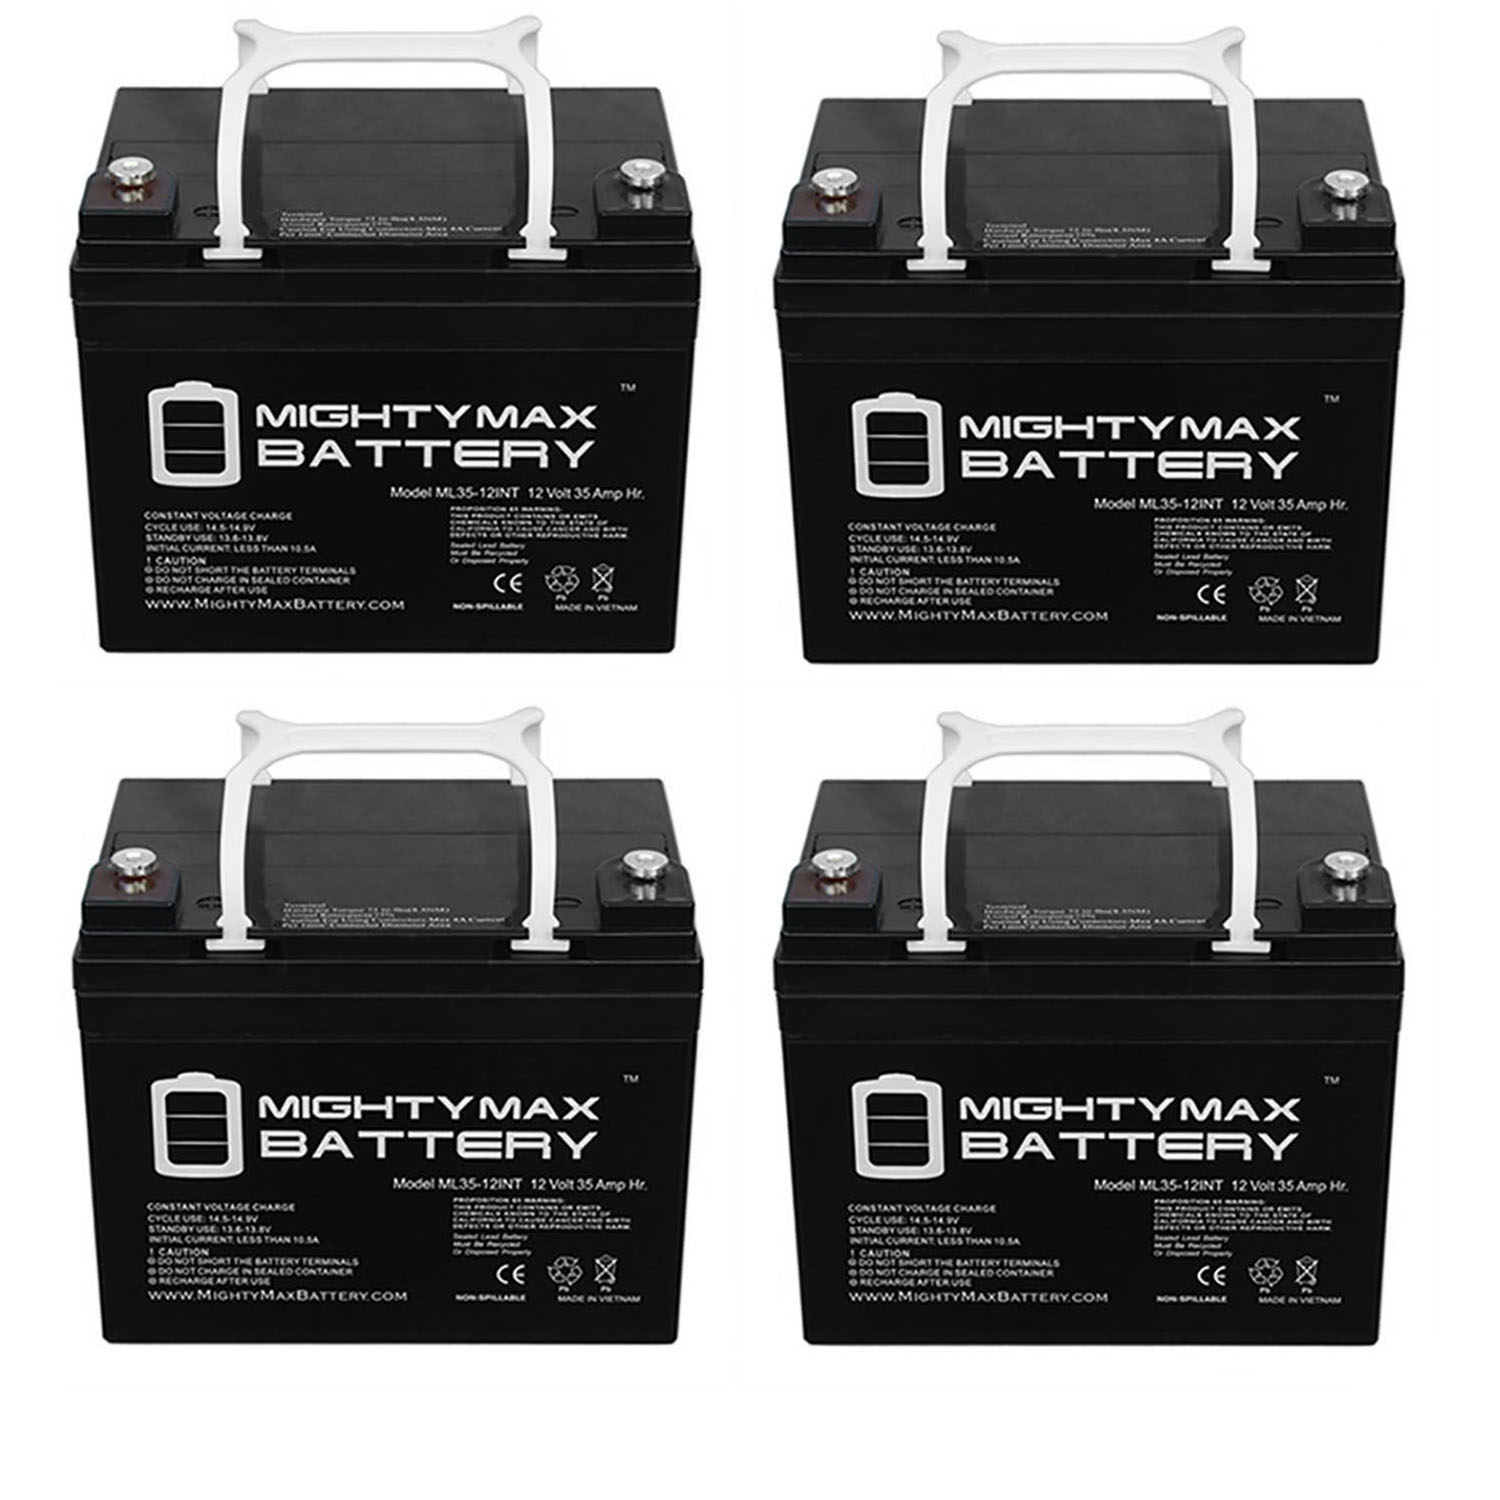 12V 35AH INT Replacement Battery for Cub Cadet 2176 - 4 Pack